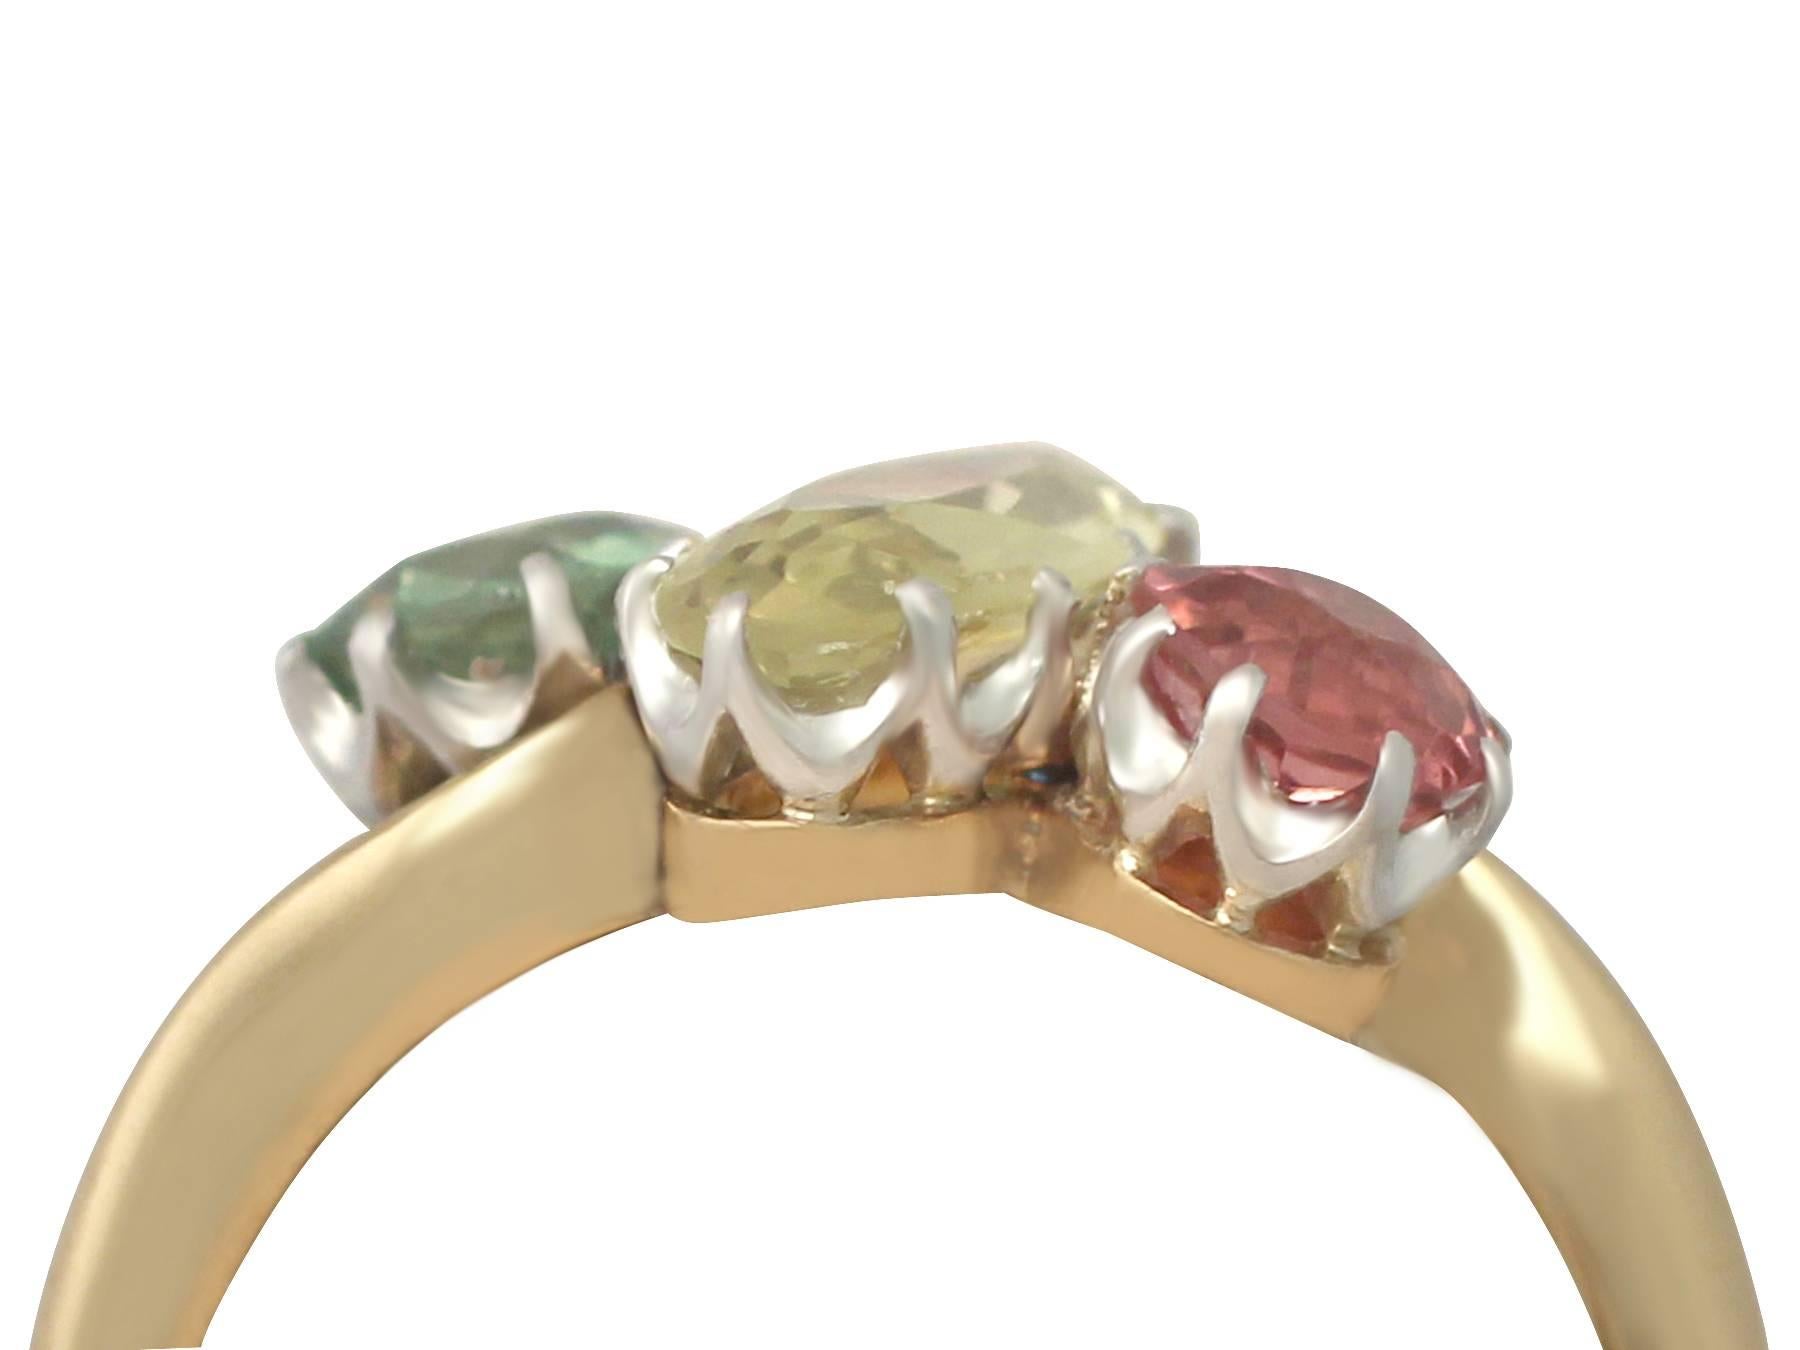 A stunning antique 1.40 carat yellow sapphire and 0.98 carat demantoid garnet, 0.57 carat pink tourmaline and 18k yellow gold trilogy twist ring with a platinum setting; part of our diverse antique jewellery and estate jewelry collections

This